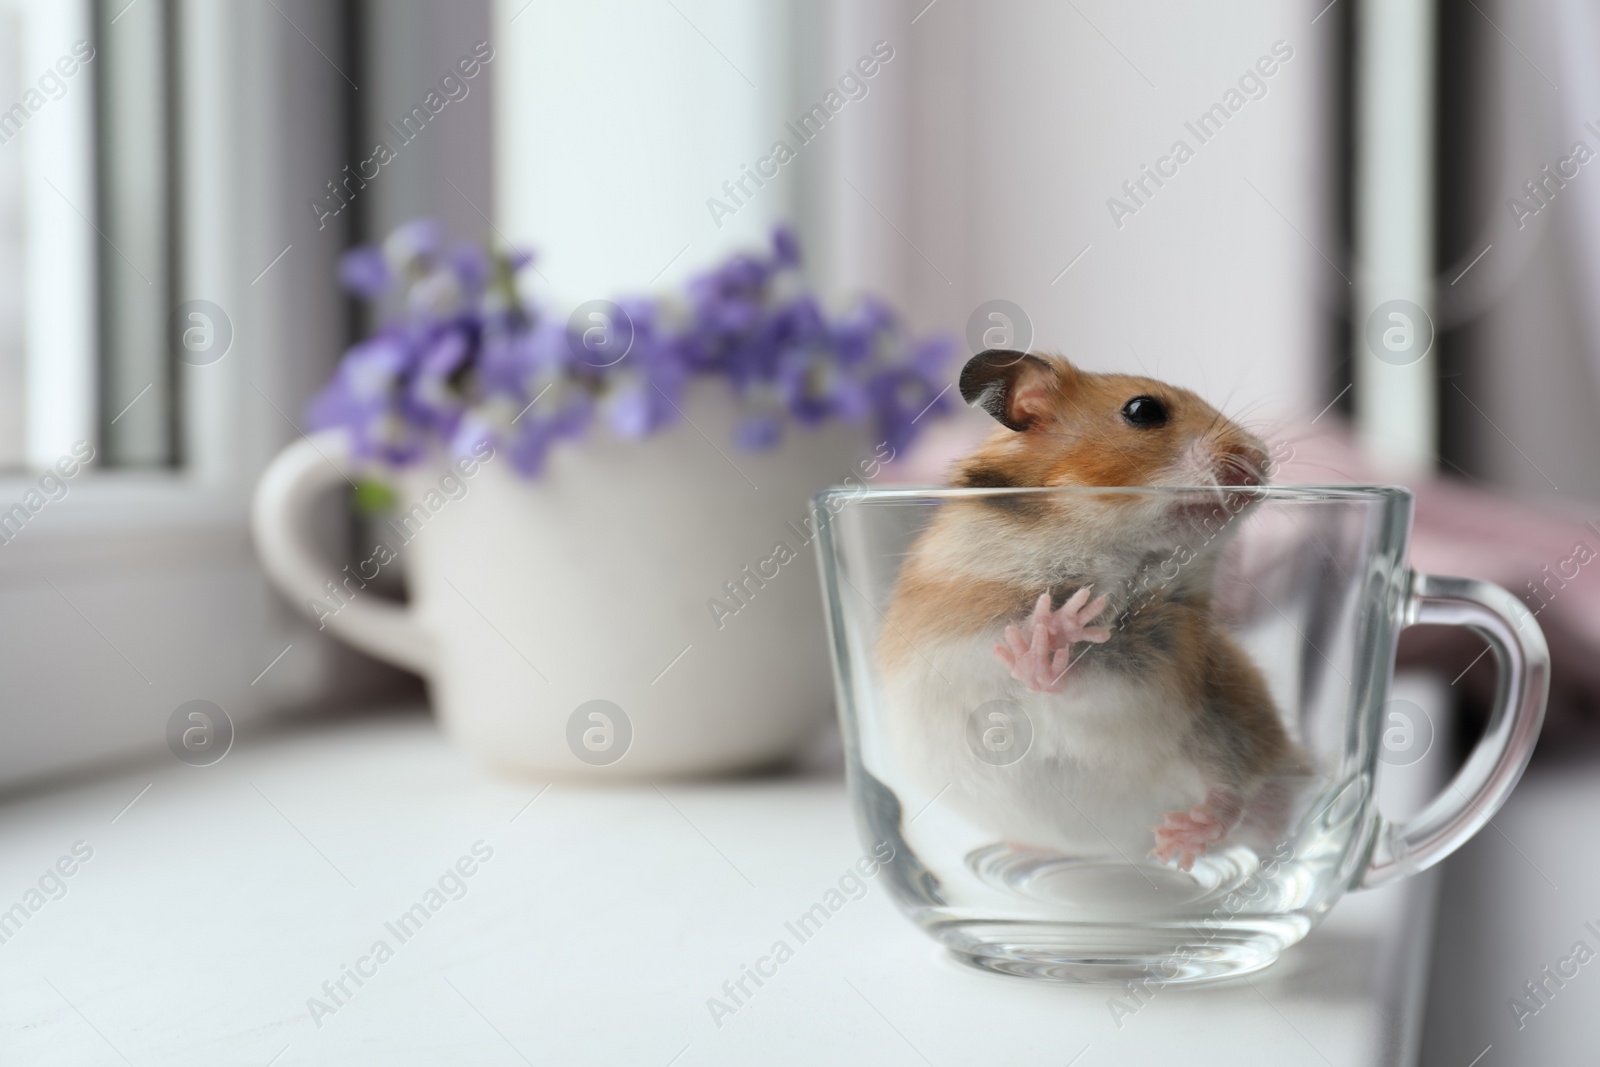 Photo of Adorable hamster in glass cup on window sill indoors. Space for text